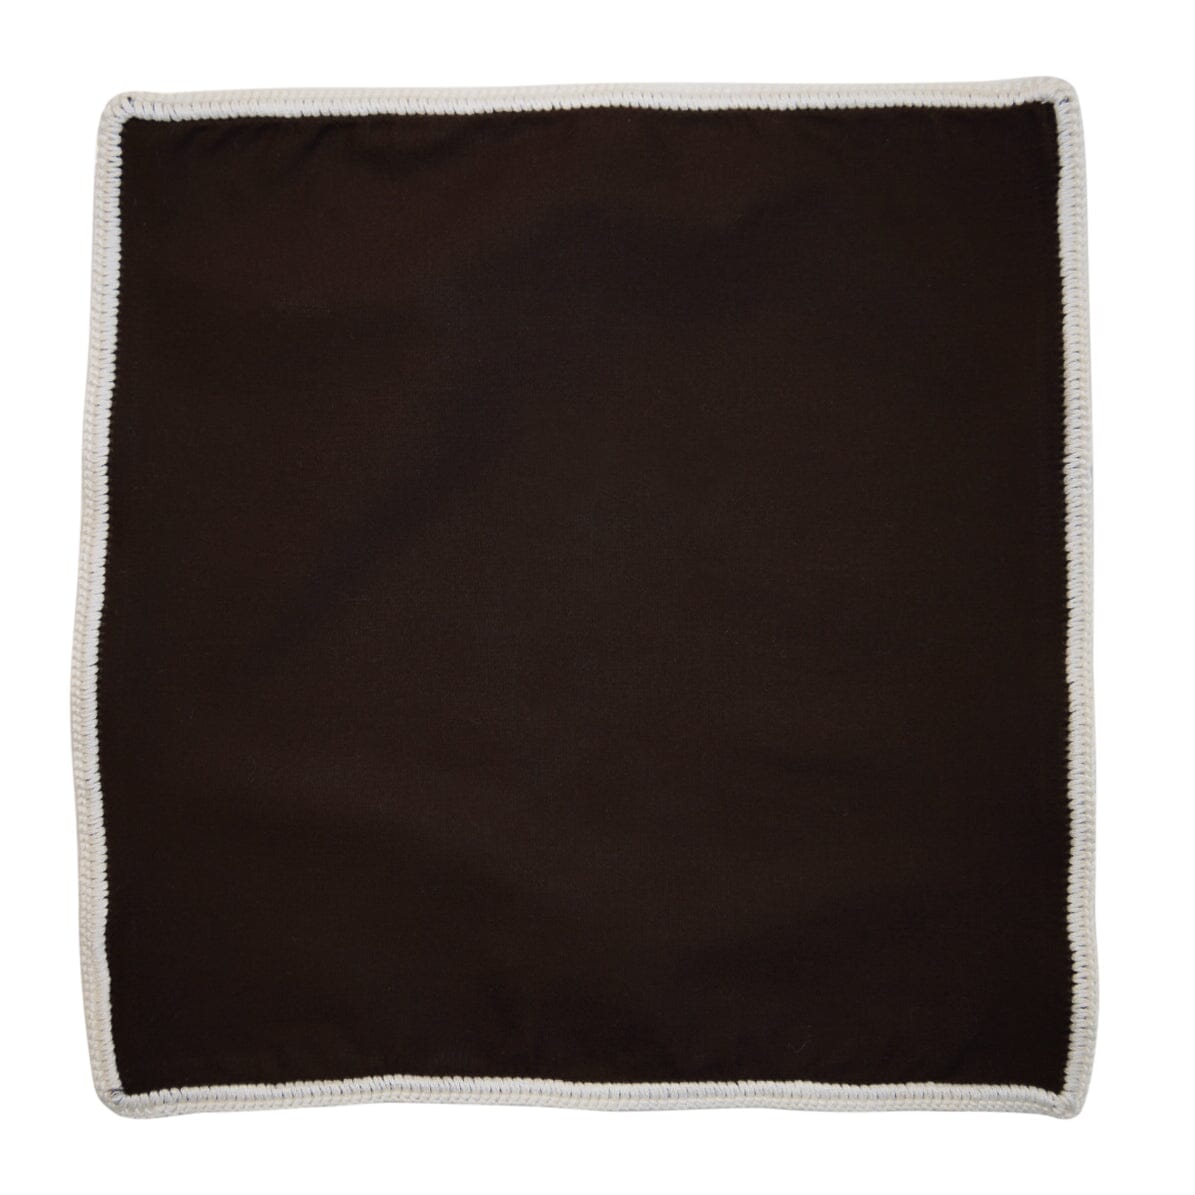 Chocolate Brown With White Signature Border